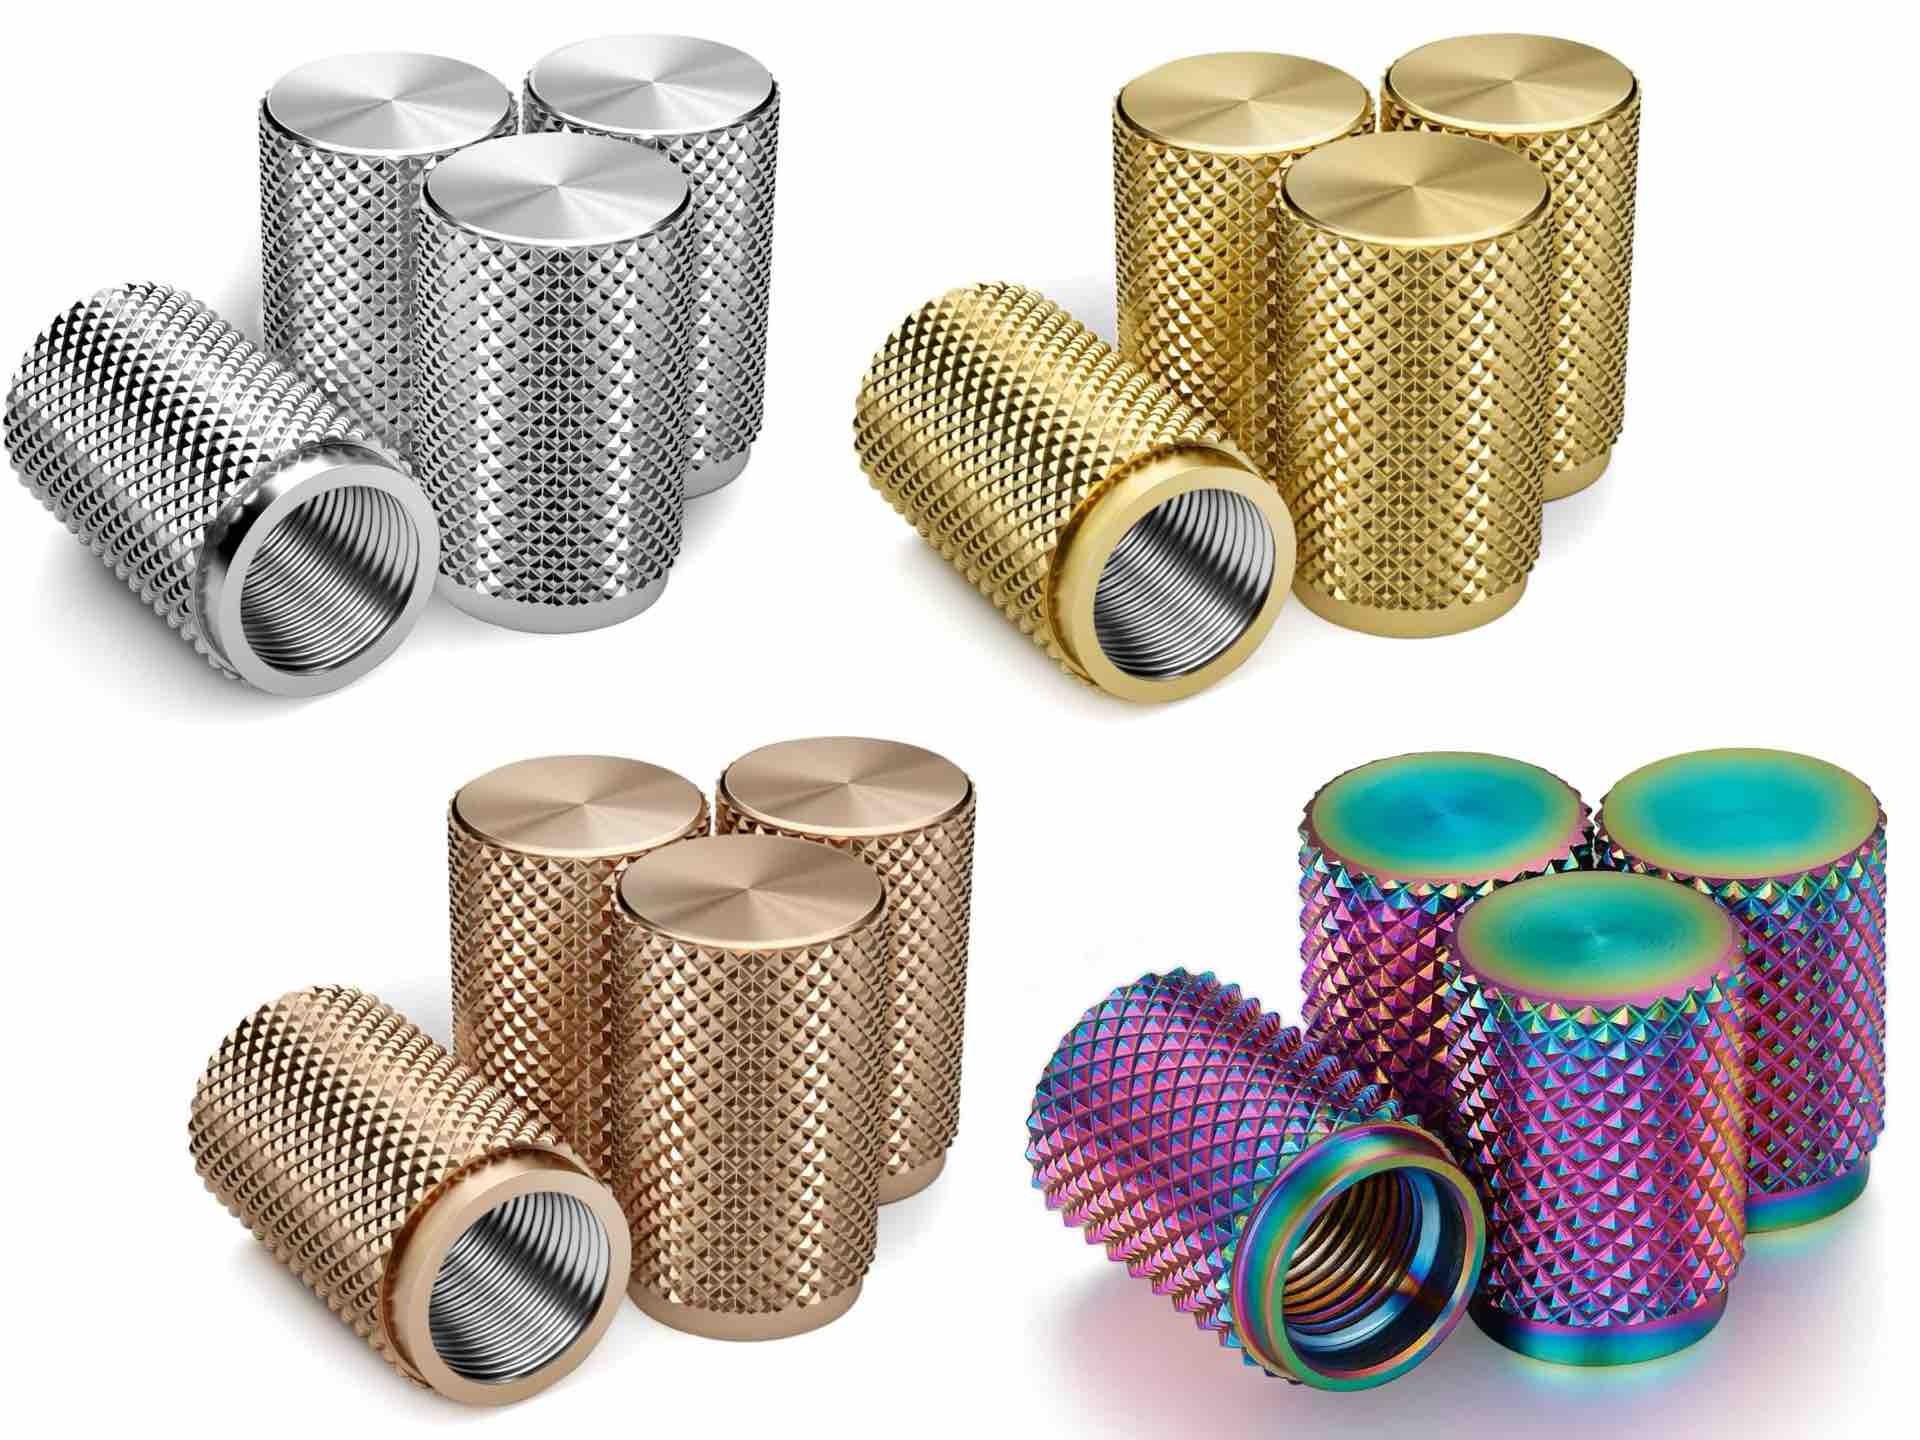 steel-hawk-extended-knurled-stainless-steel-tire-air-valve-caps-colors